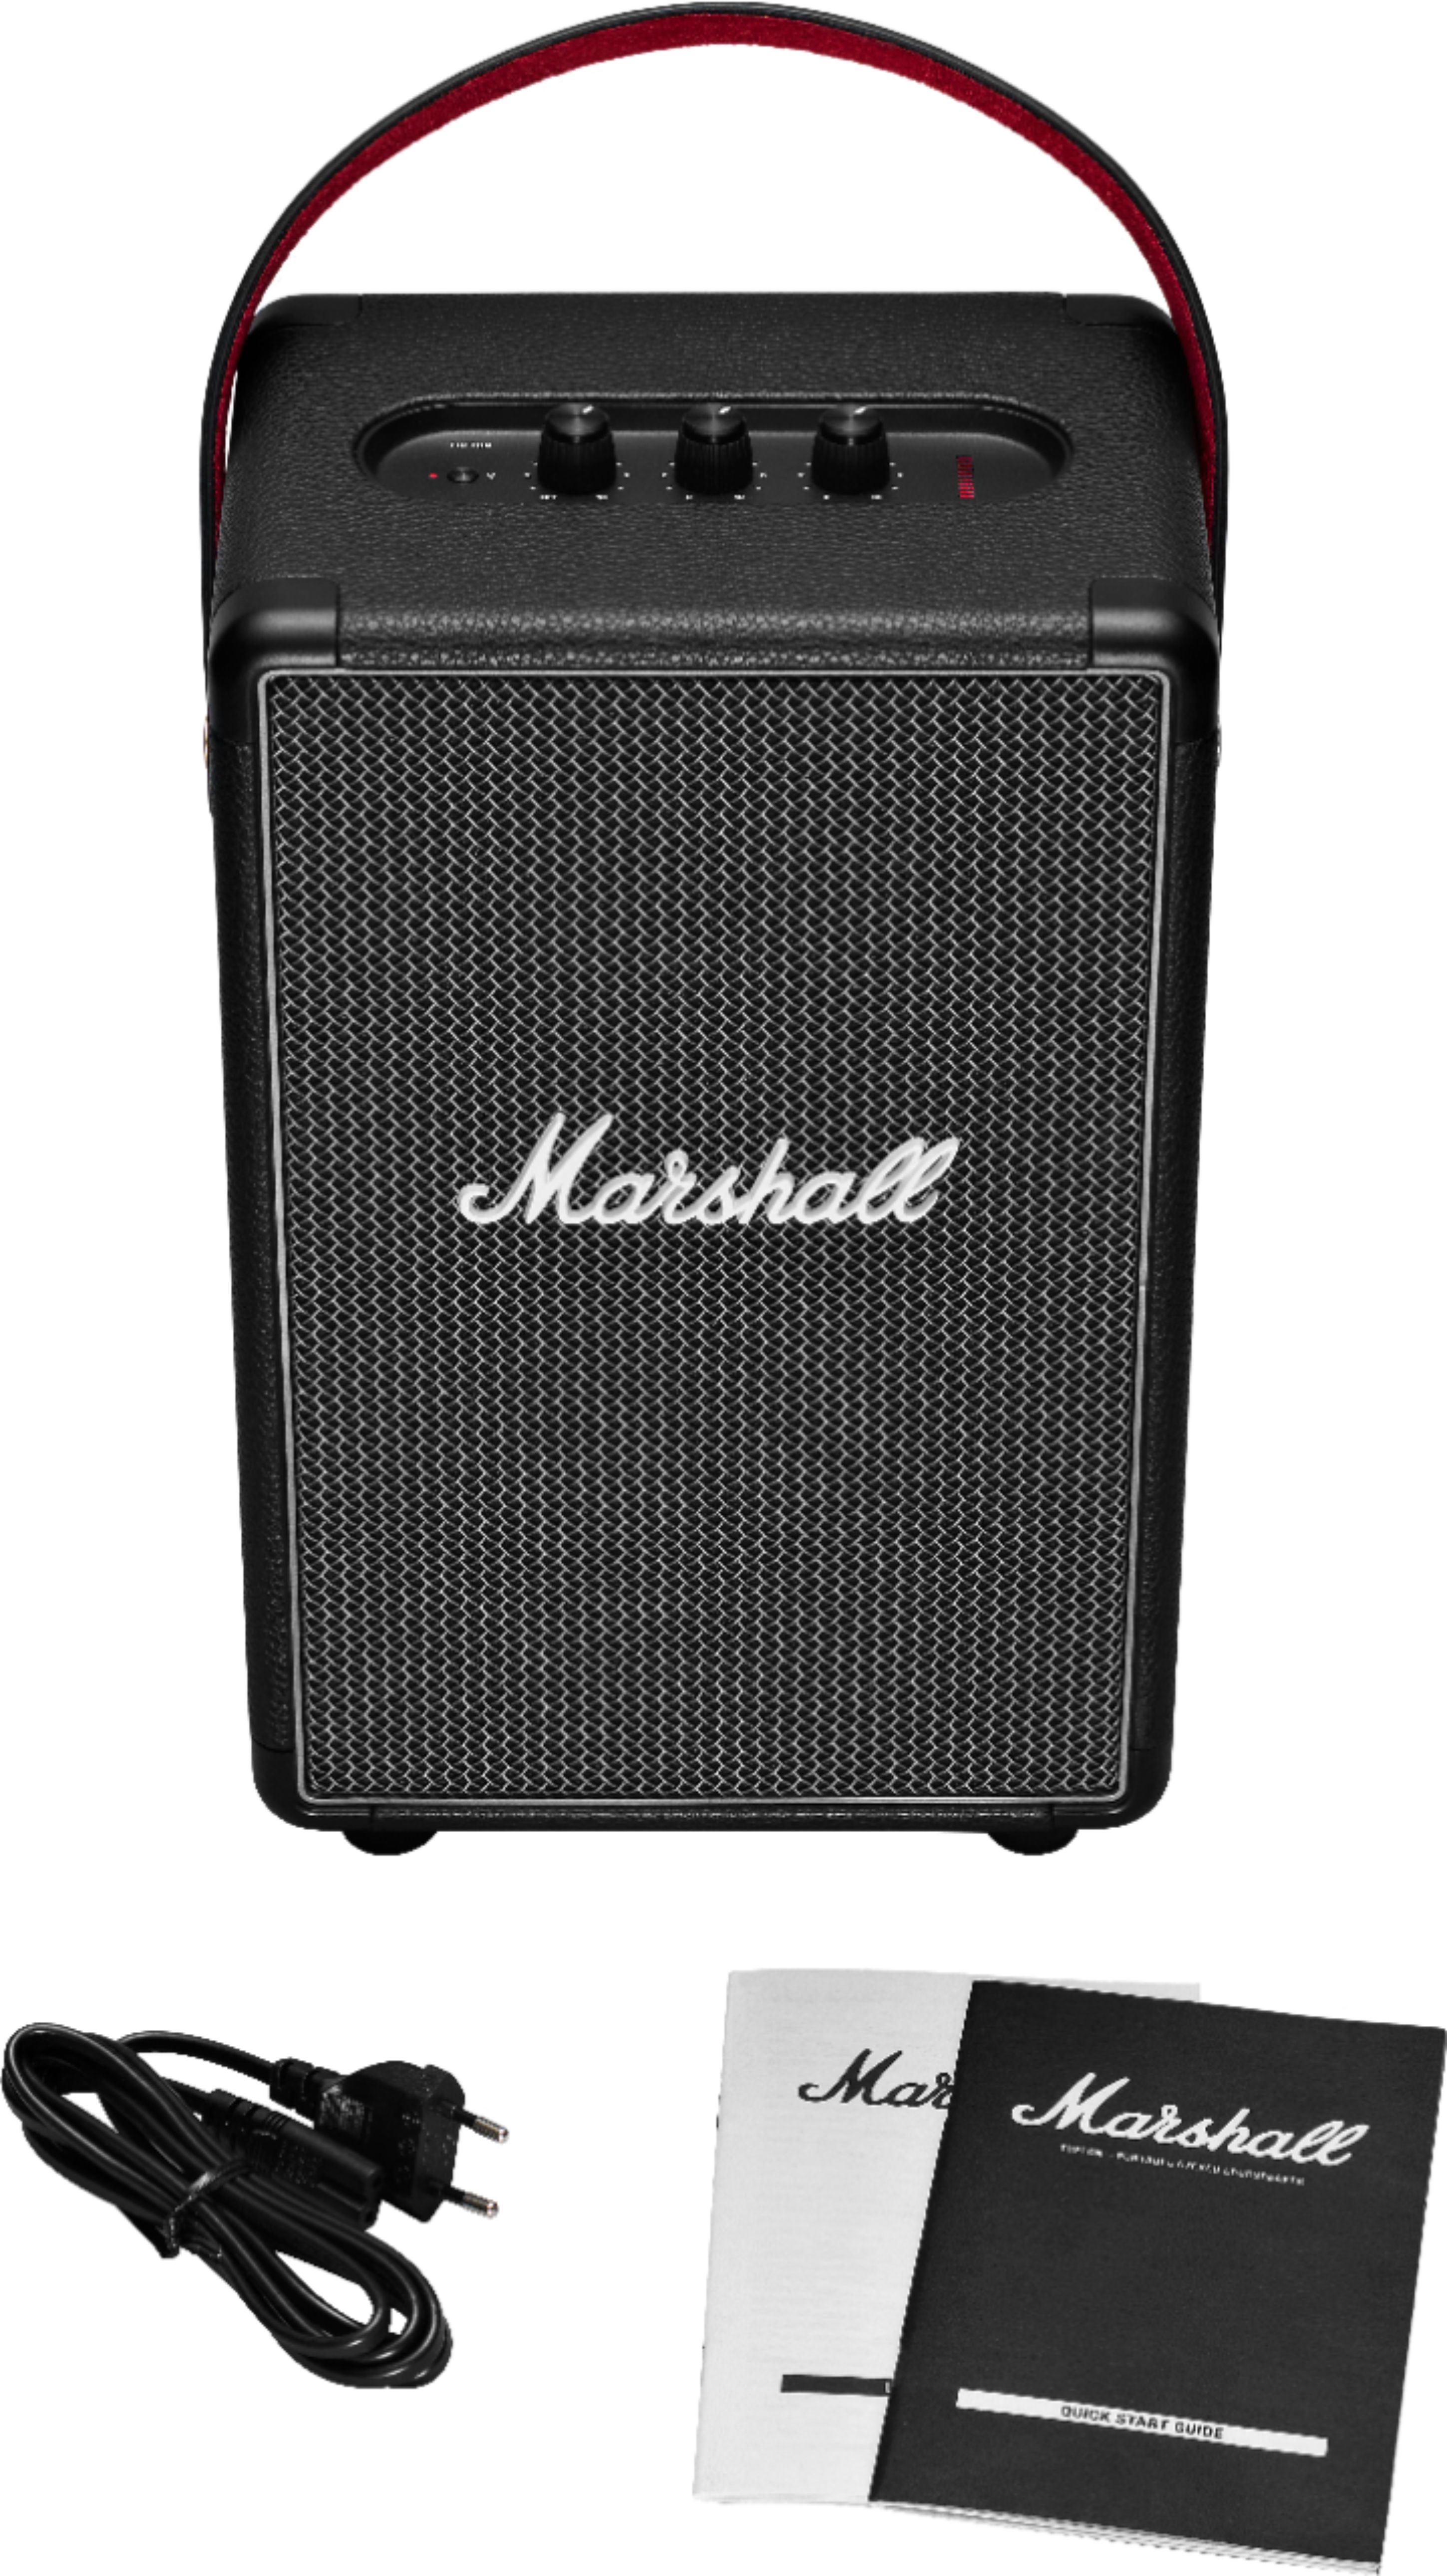 Marshall Speaker Killer: Trunk Audio Megalo Portable Wireless Bluetooth  Speaker Unboxing and Review 